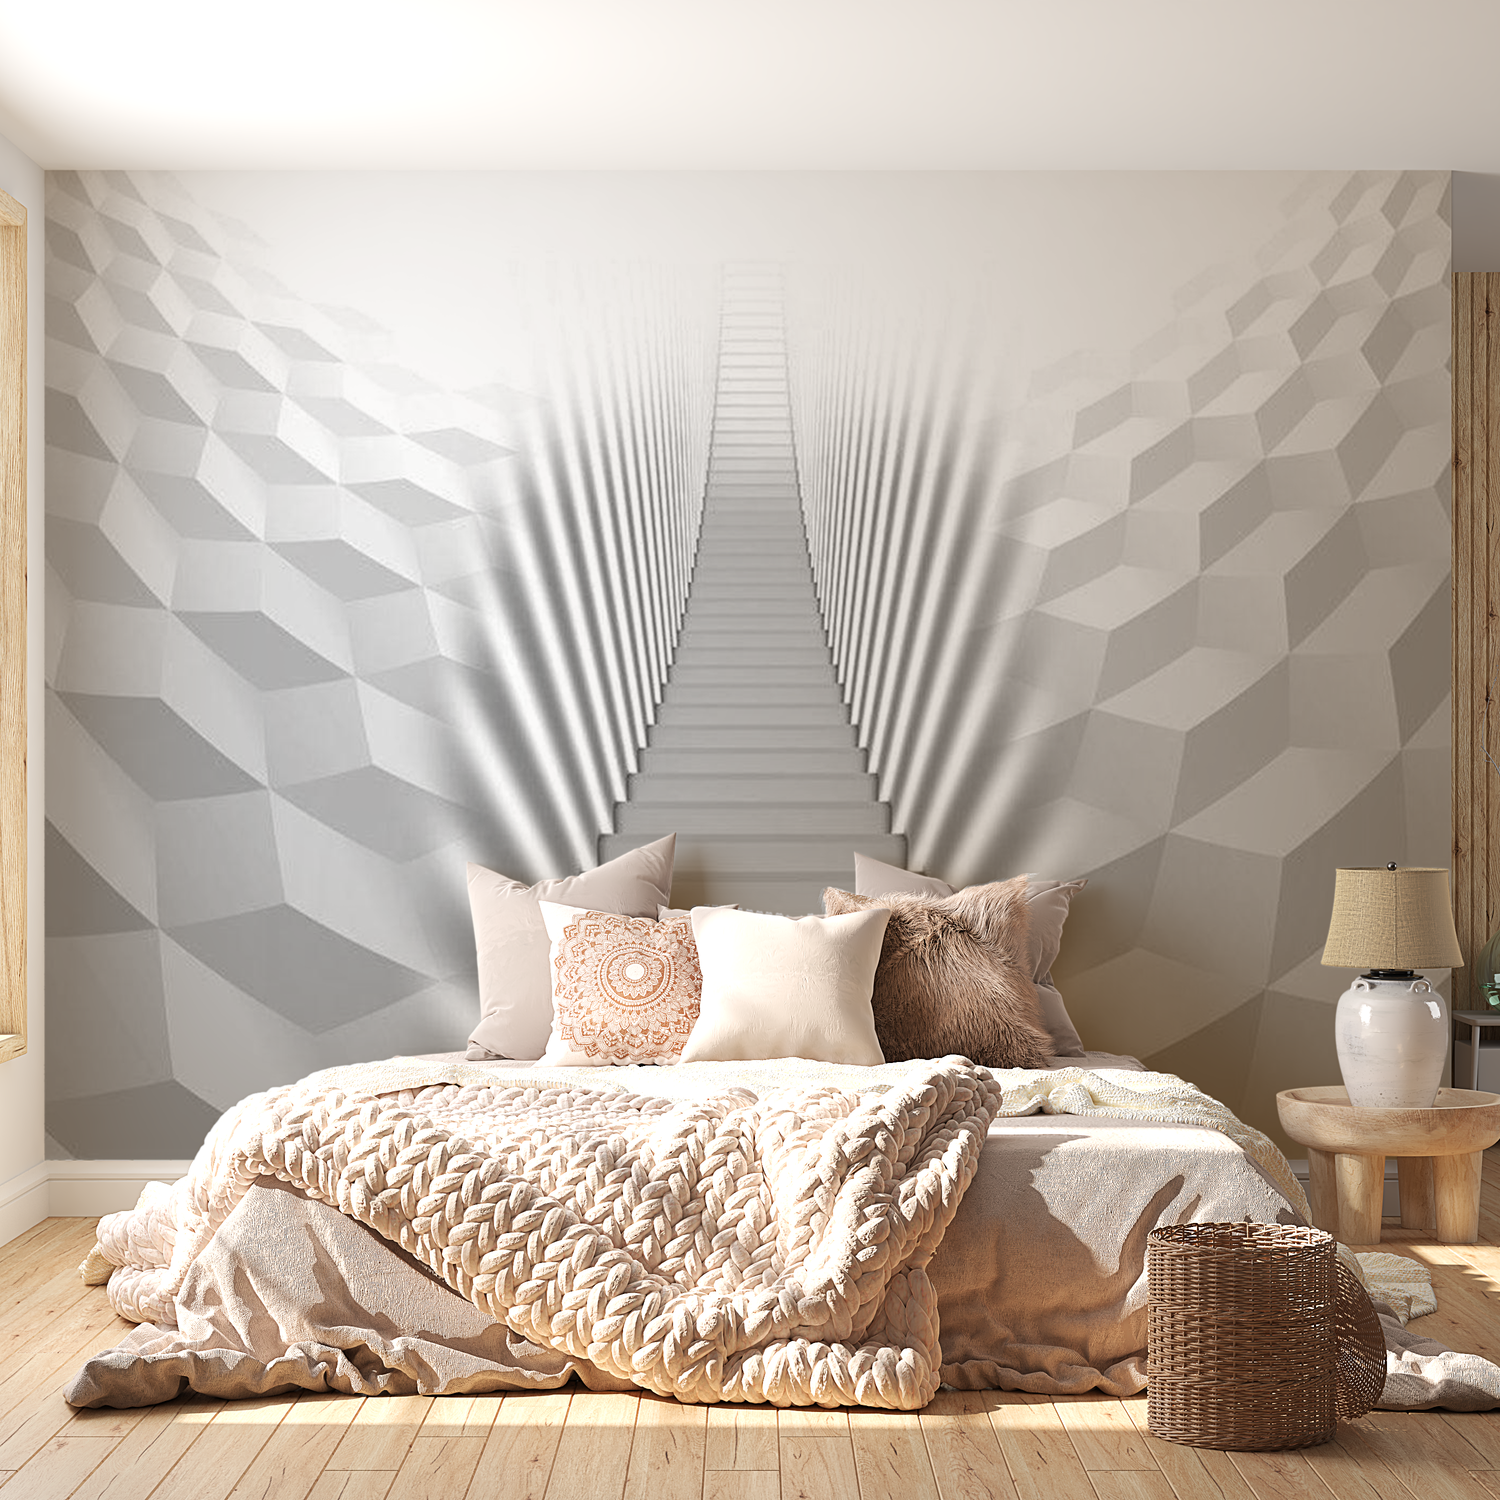 3D Illusion Wallpaper Wall Mural - Mneme 39"Wx27"H